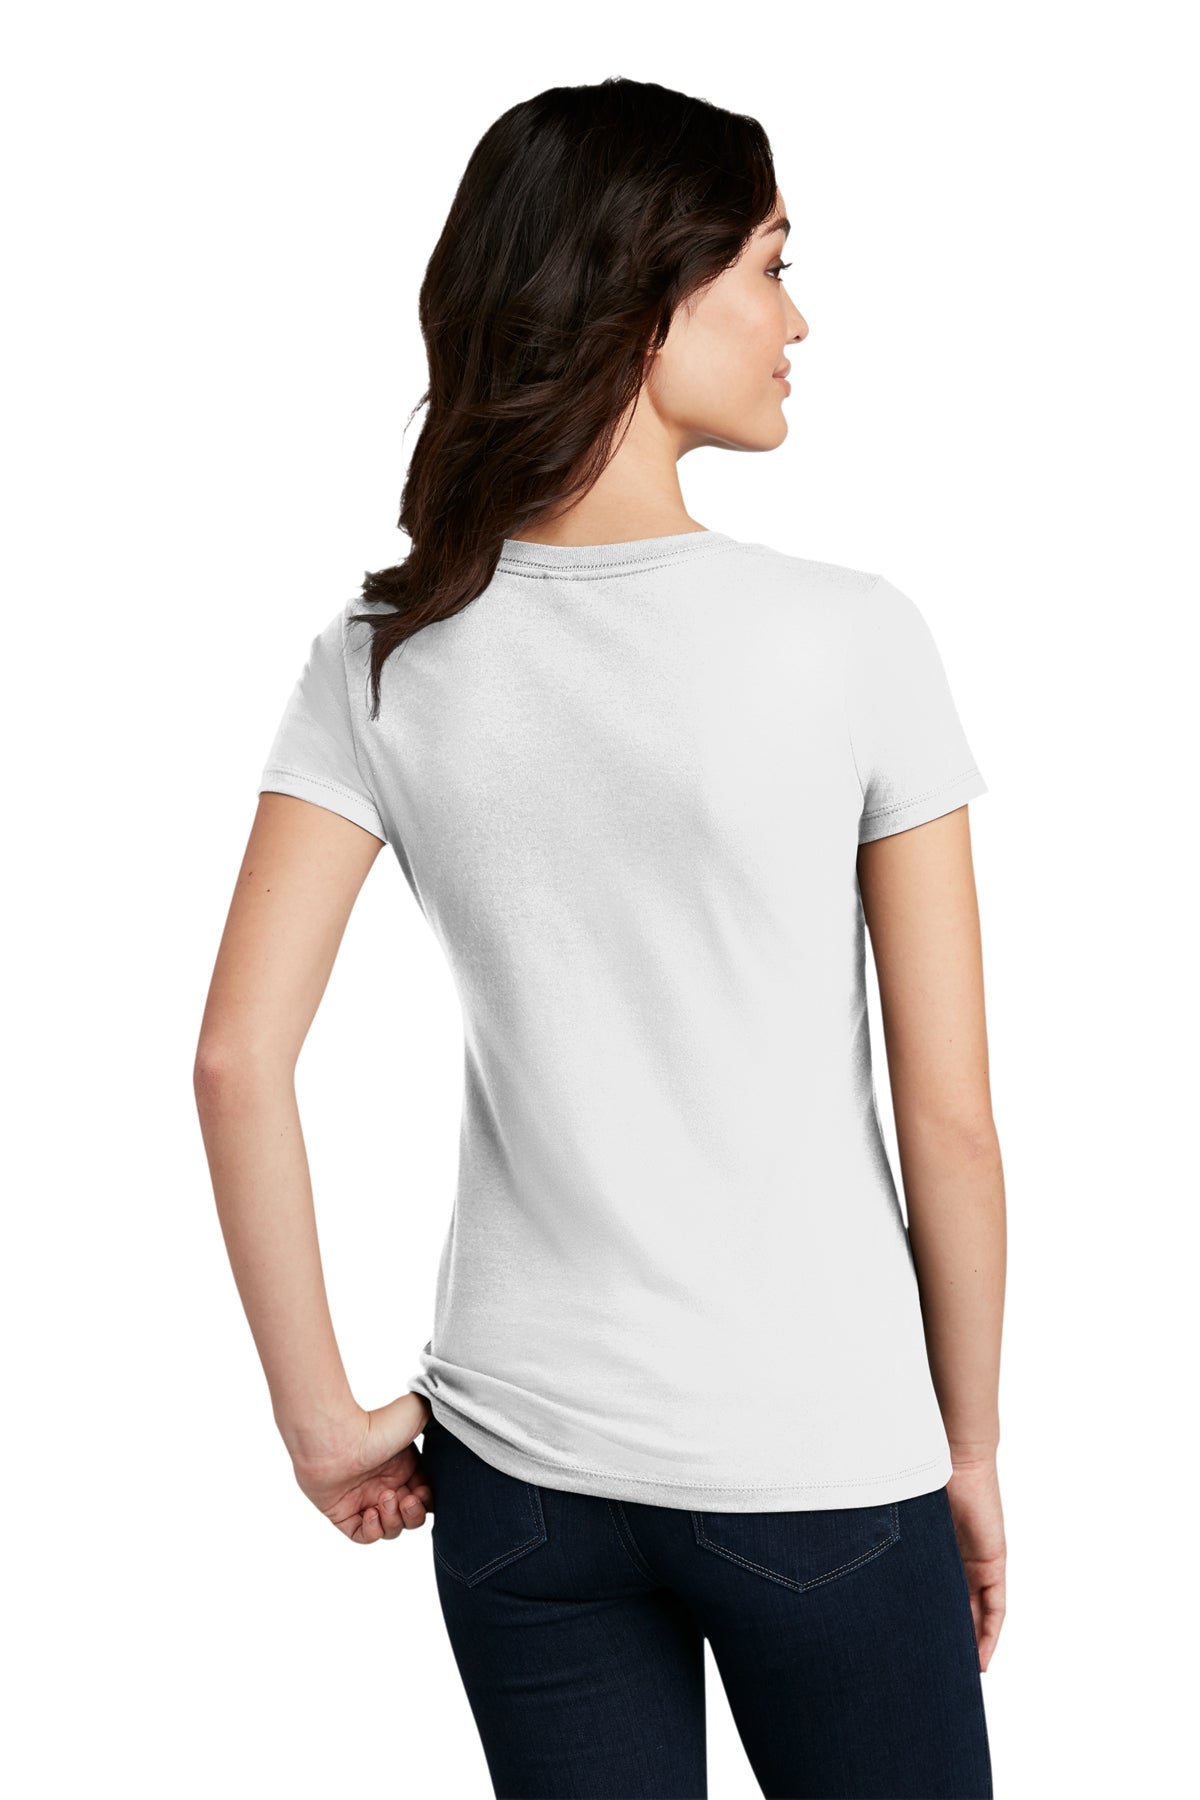 District Made Ladies Perfect Blend Crew Tee's, White